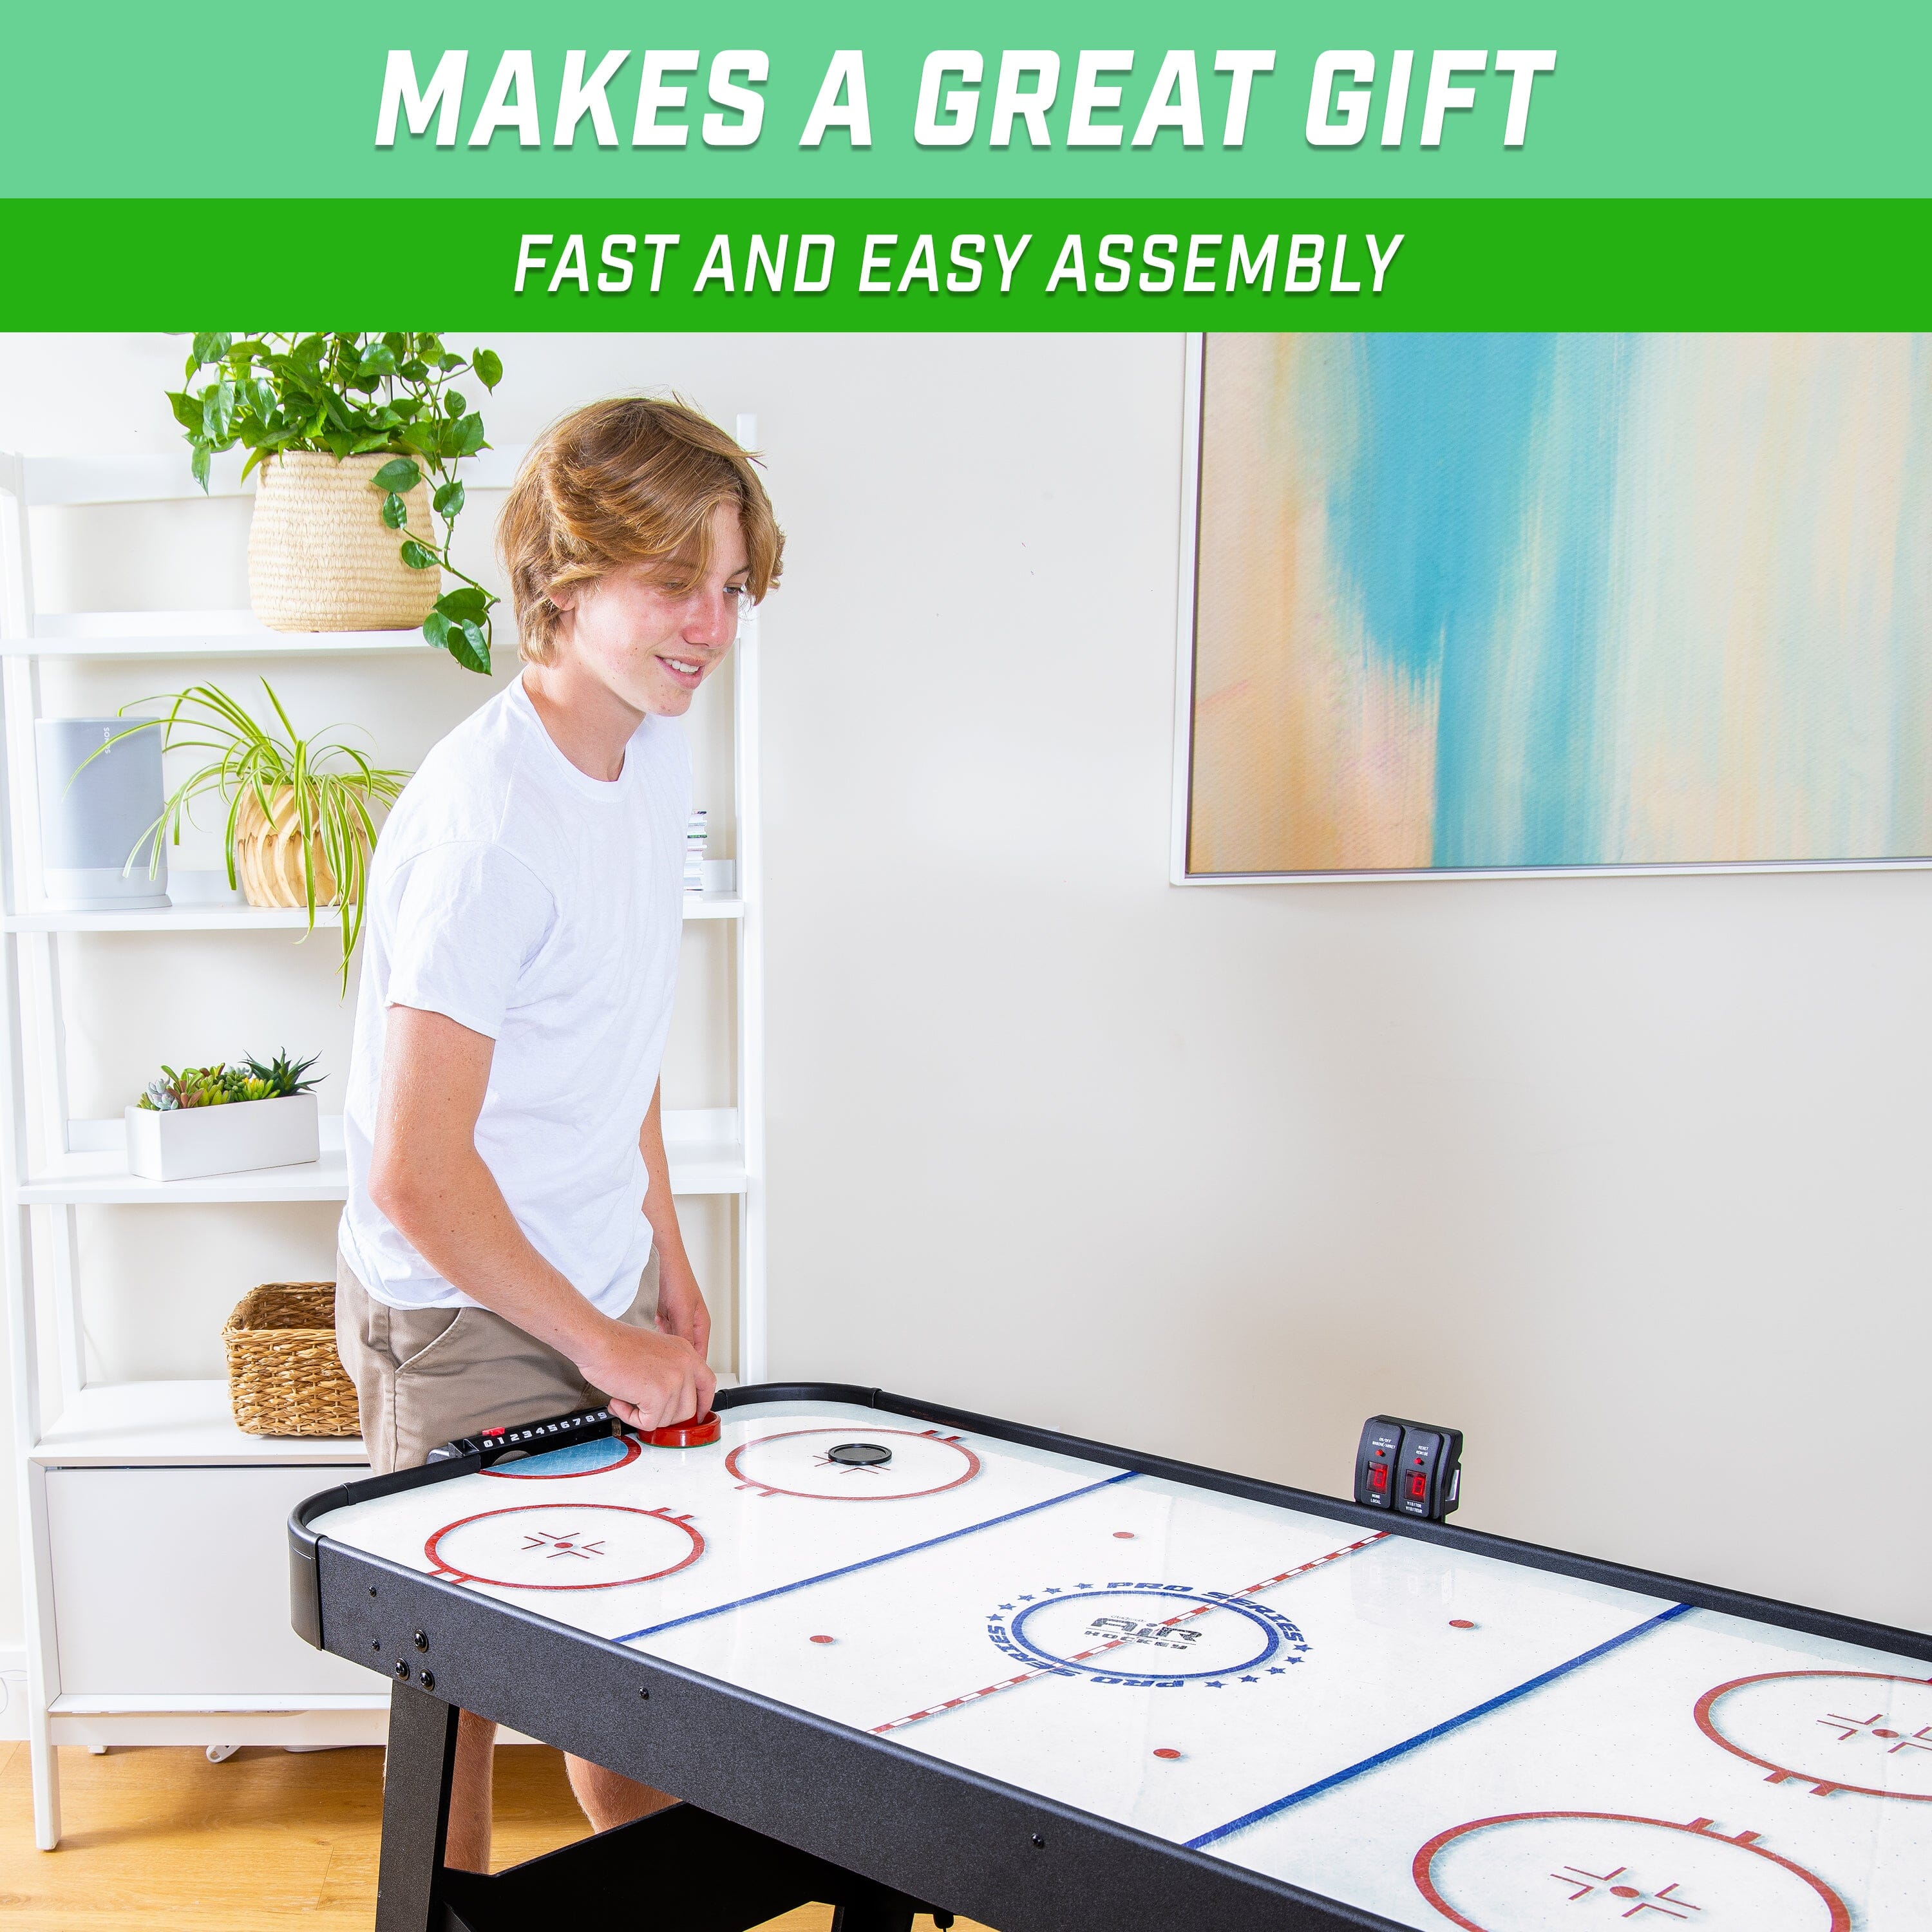 GoSports 54 Inch Air Hockey Arcade Table for Kids & Adults - Includes 2  Pushers, 3 Pucks, AC Motor, and LED Scoreboard –